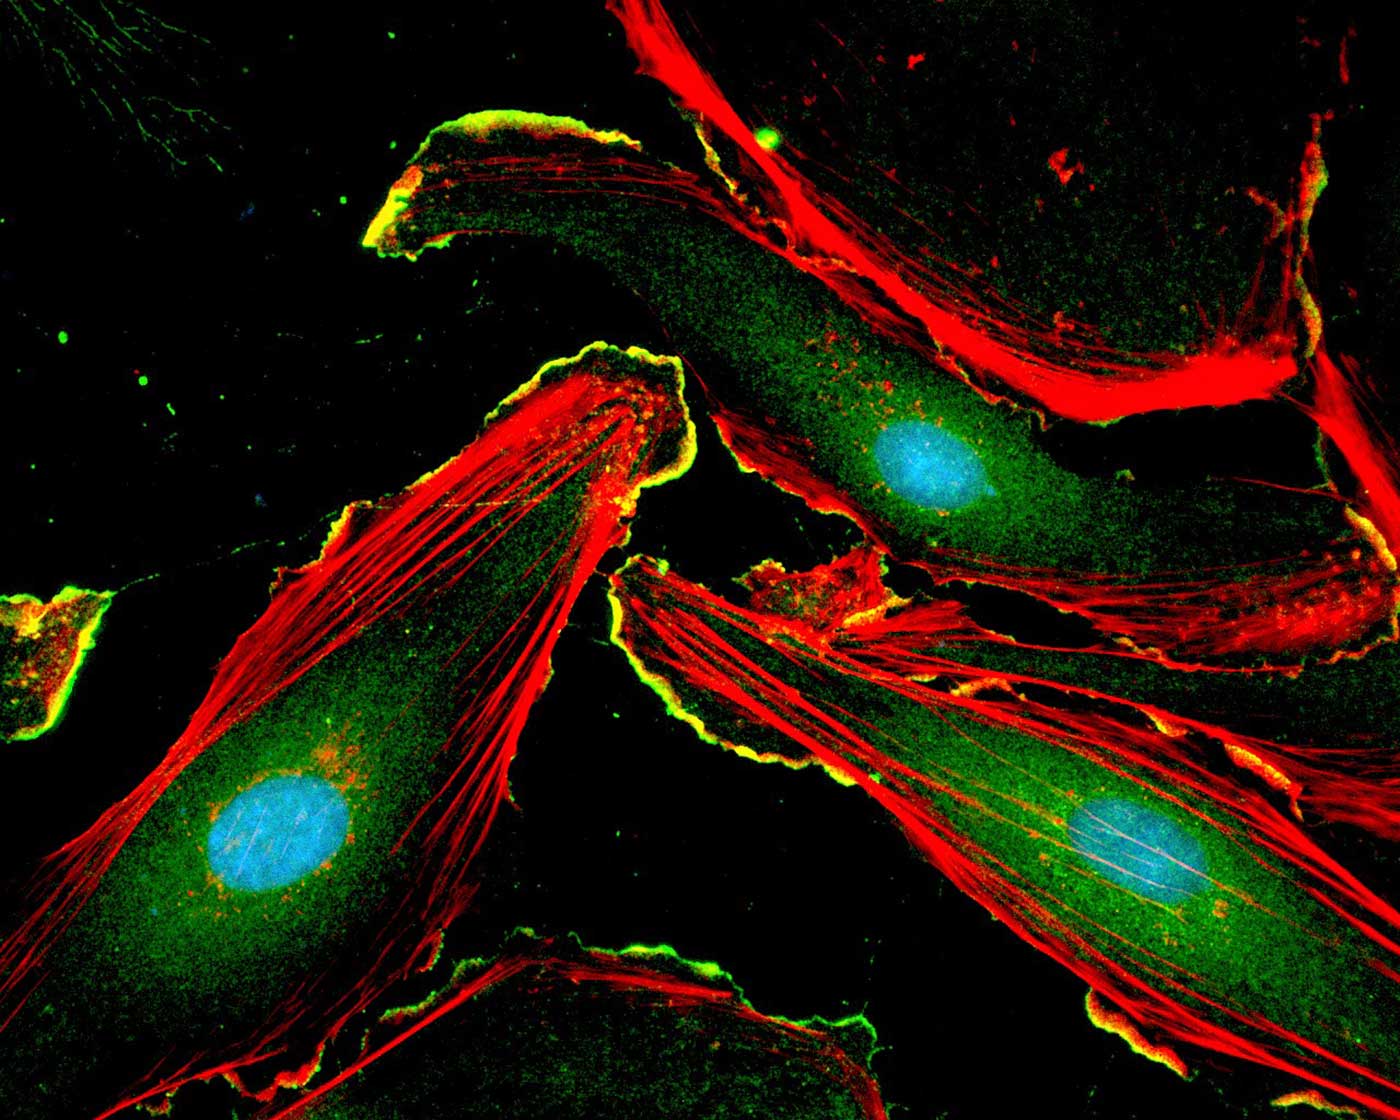 Components of cells stained blue, red, and green